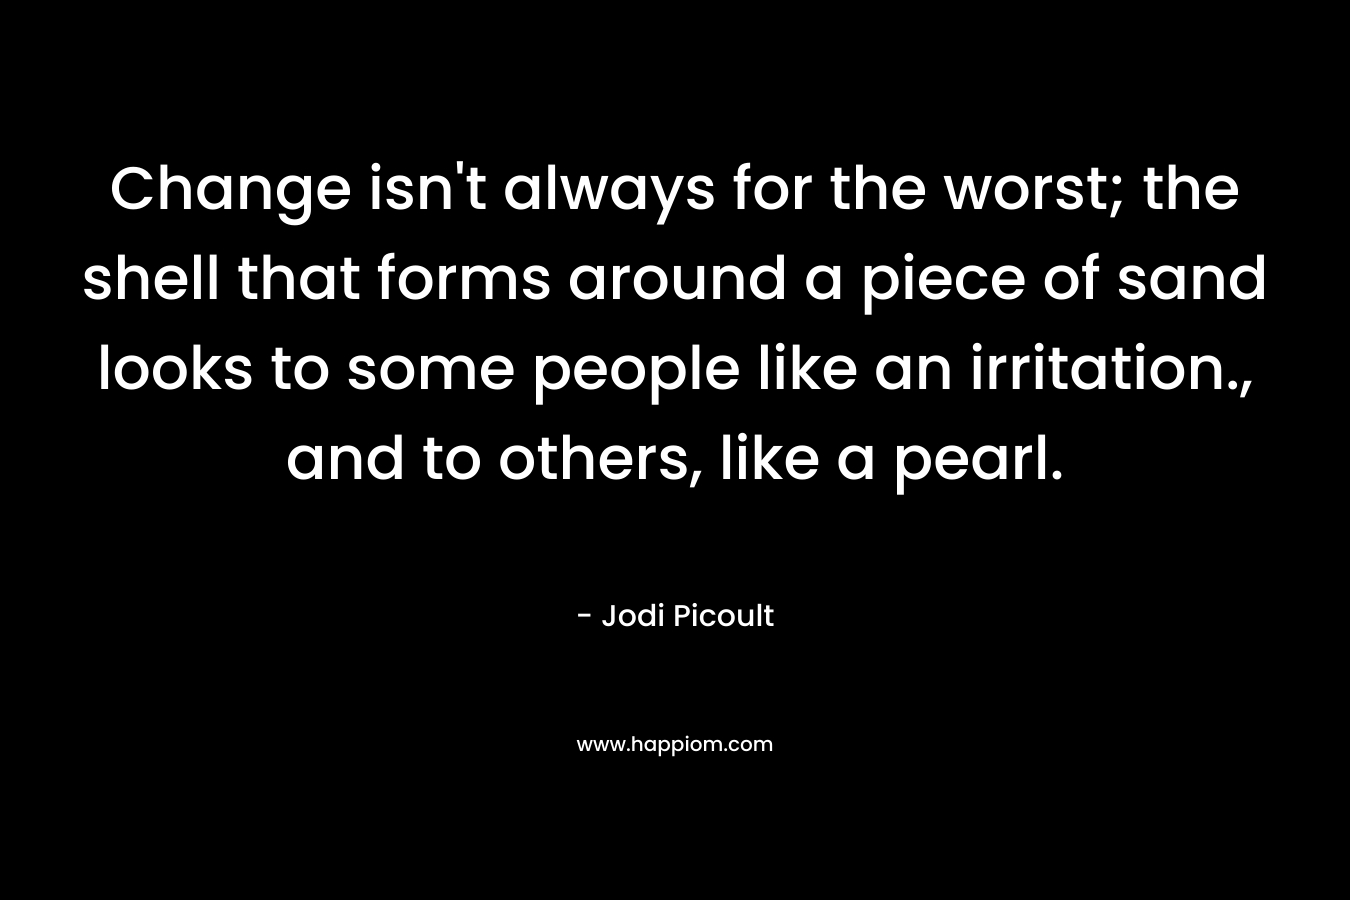 Change isn’t always for the worst; the shell that forms around a piece of sand looks to some people like an irritation., and to others, like a pearl. – Jodi Picoult